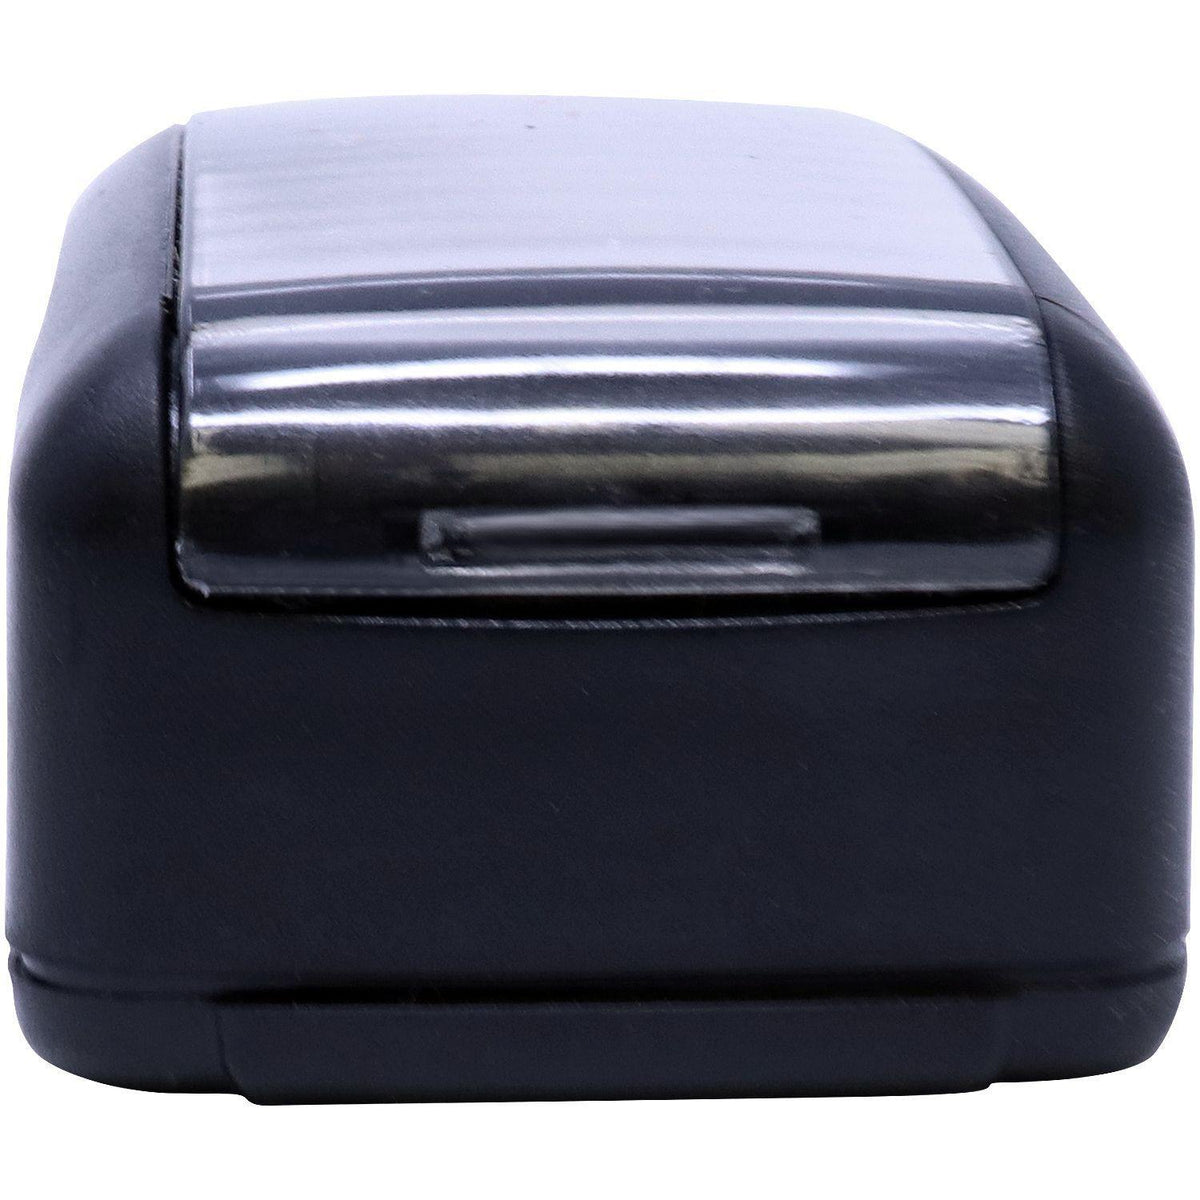 Large Pre-Inked No Mail Receptacle Stamp Side View